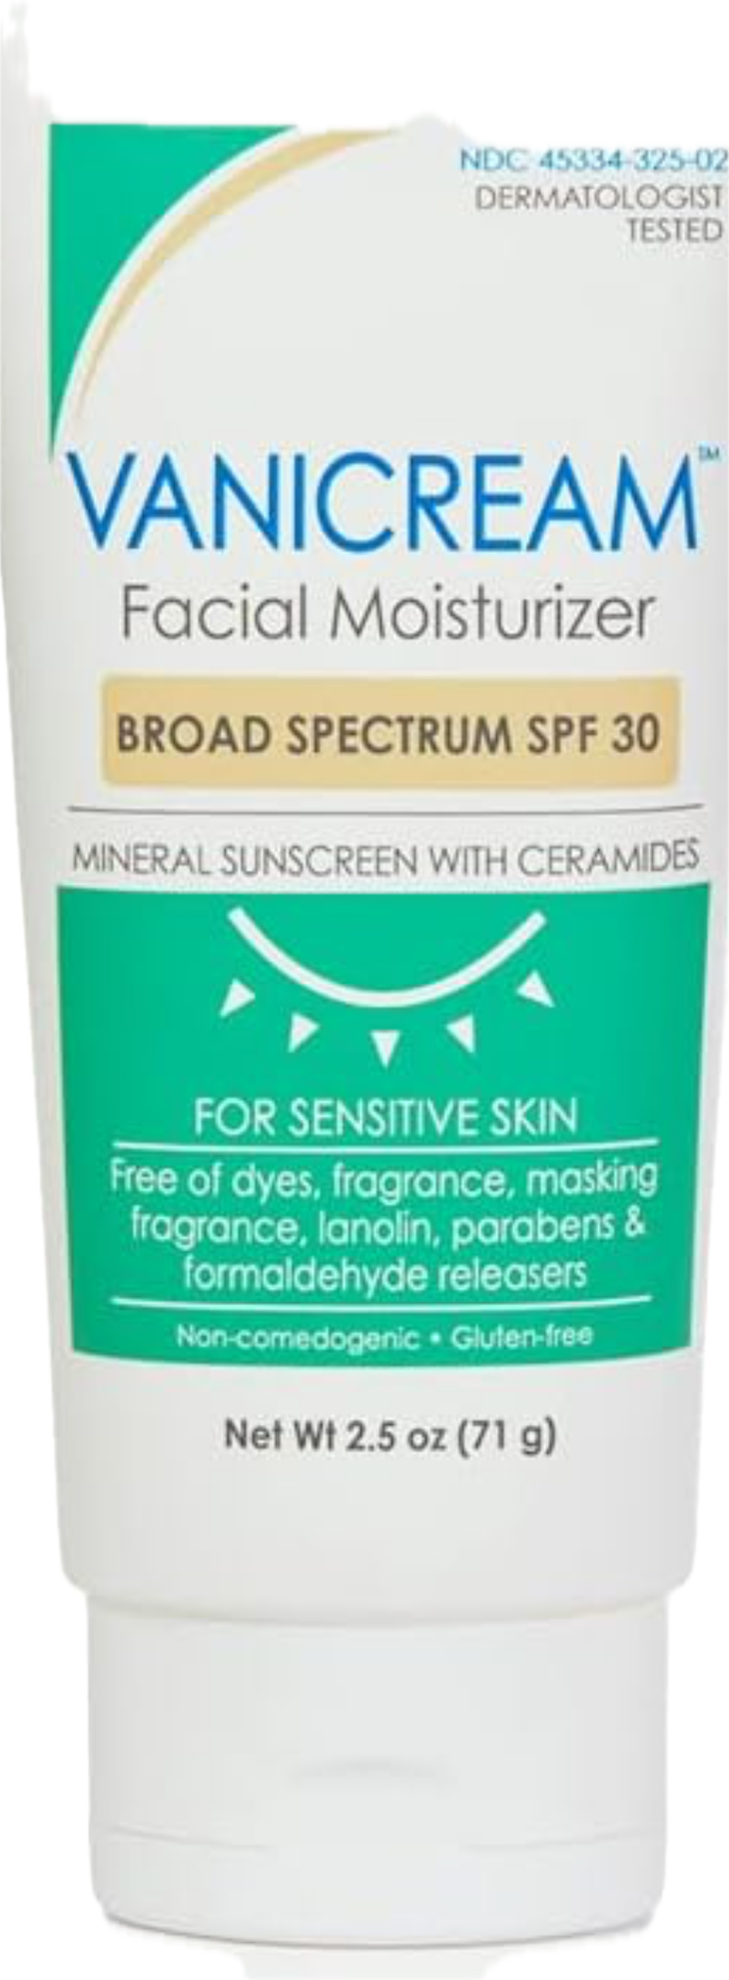 Vanicream FACIAL MOISTURIZER SPF 30 with ZINK OCXIDE Broad Spectrum Unscented for SENSITIVE SKIN 2.5oz 71g - Supporting ORCRF.org